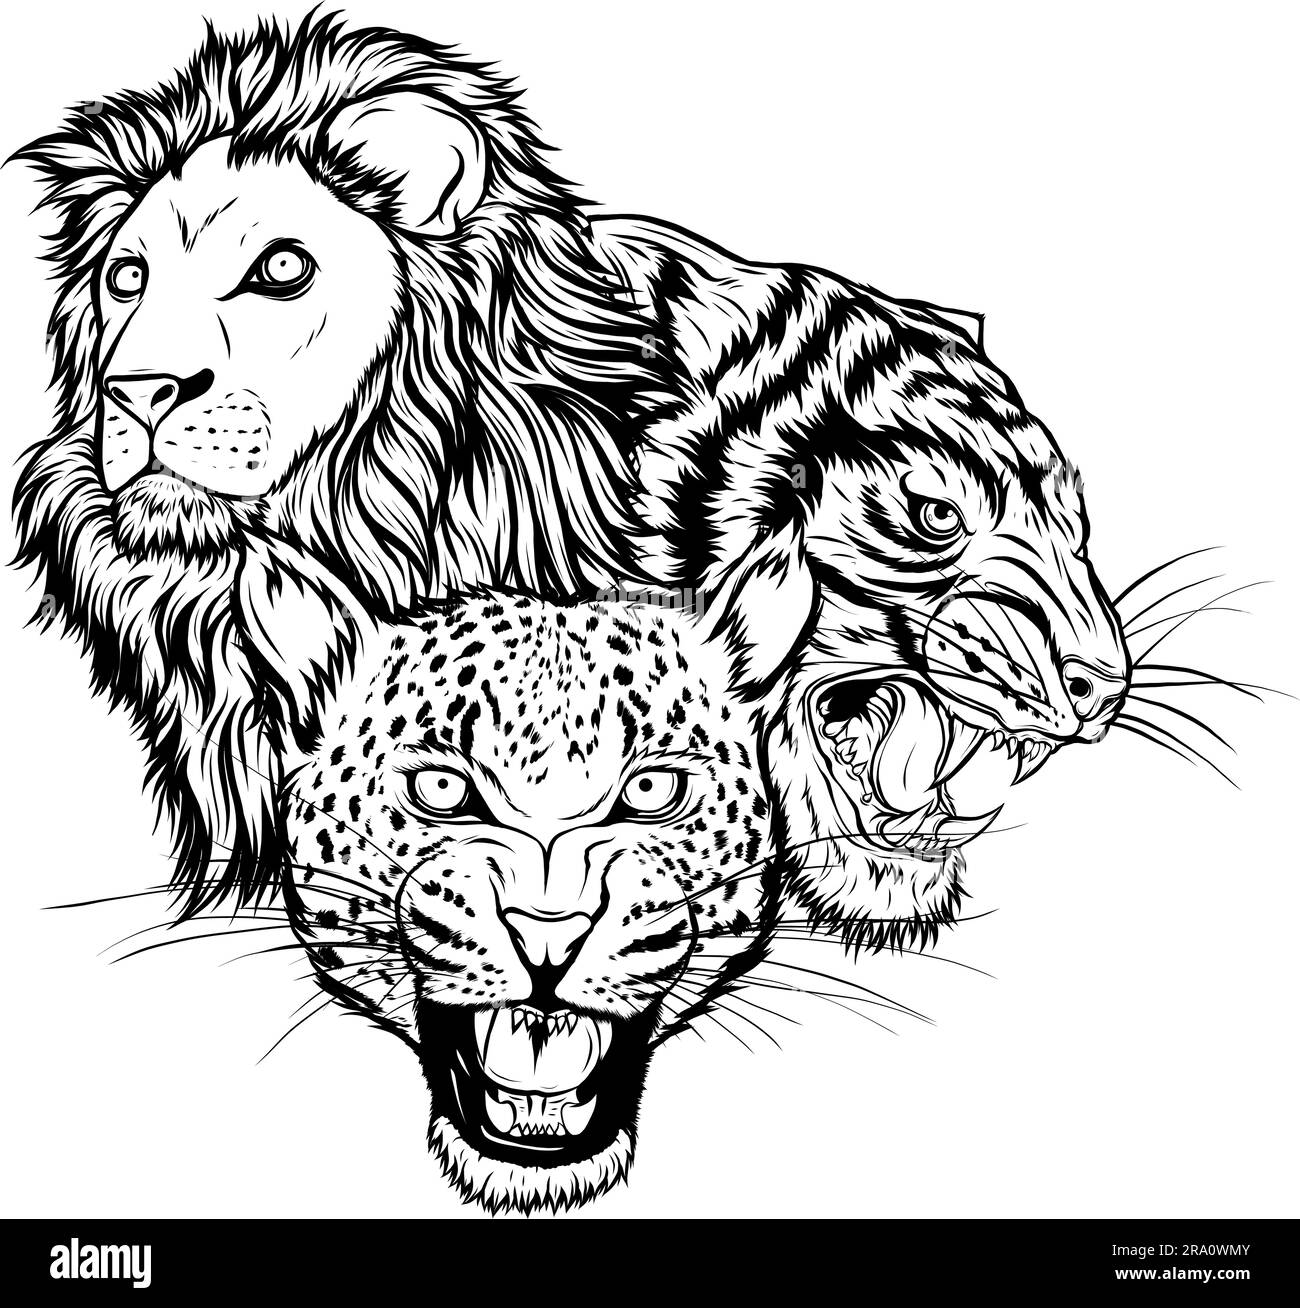 leopard head in black and white outline Stock Vector